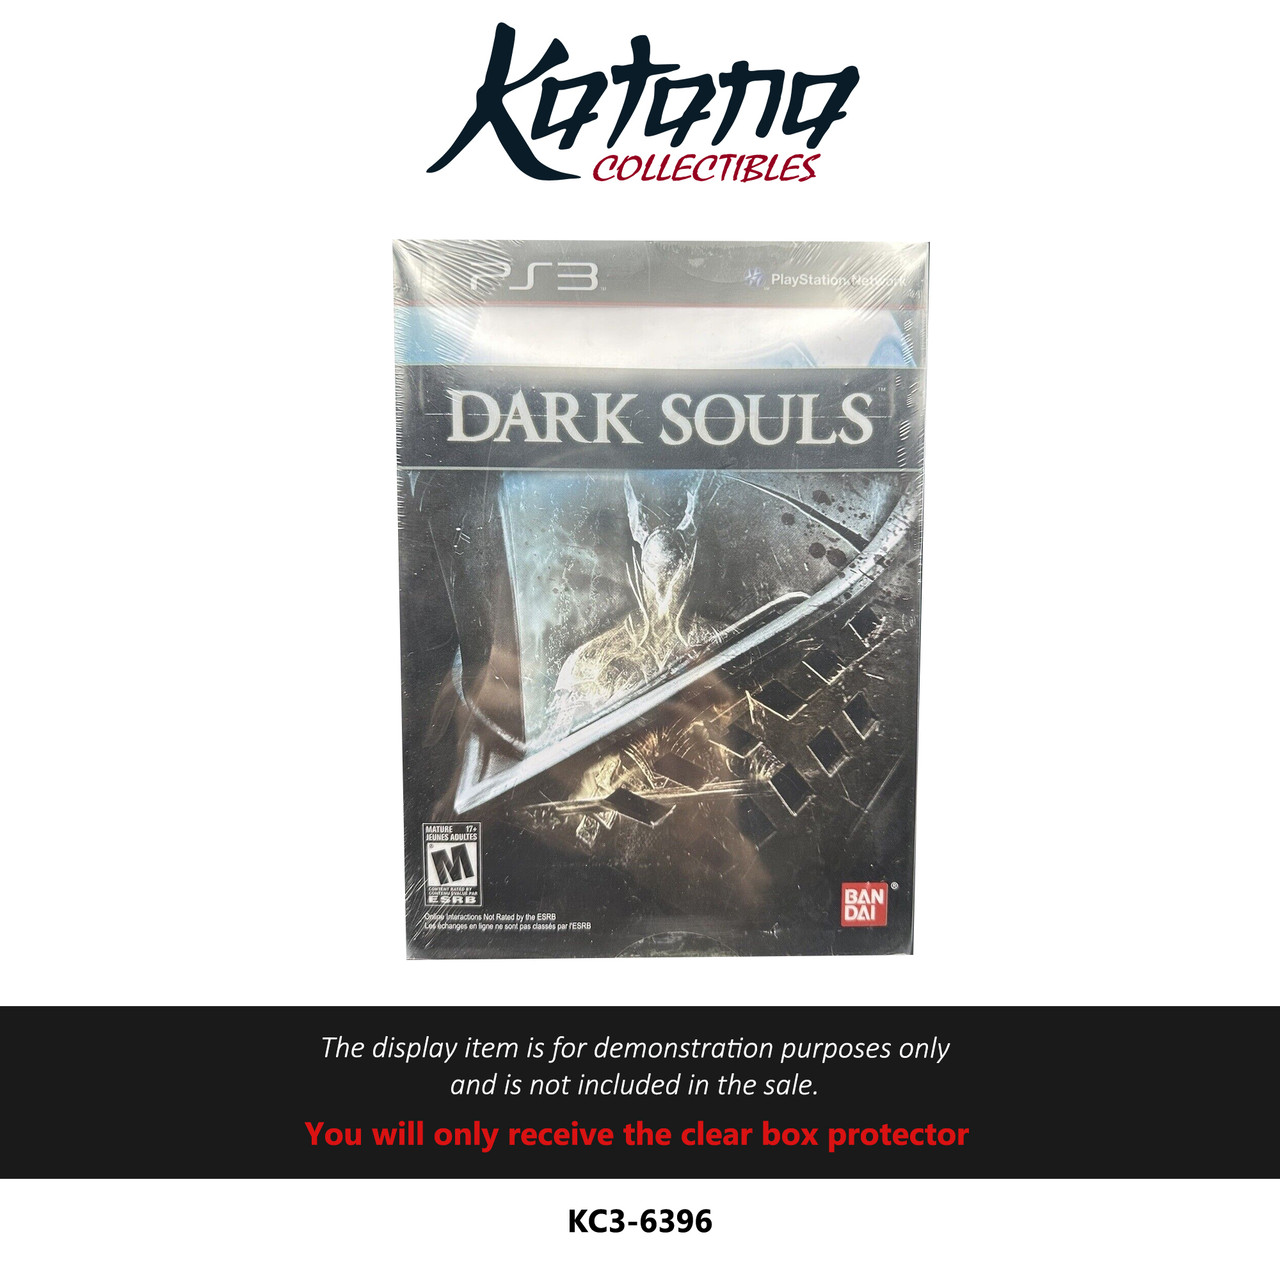 Katana Collectibles Protector For Dark Souls Limited Edition (Us Version) For Ps3